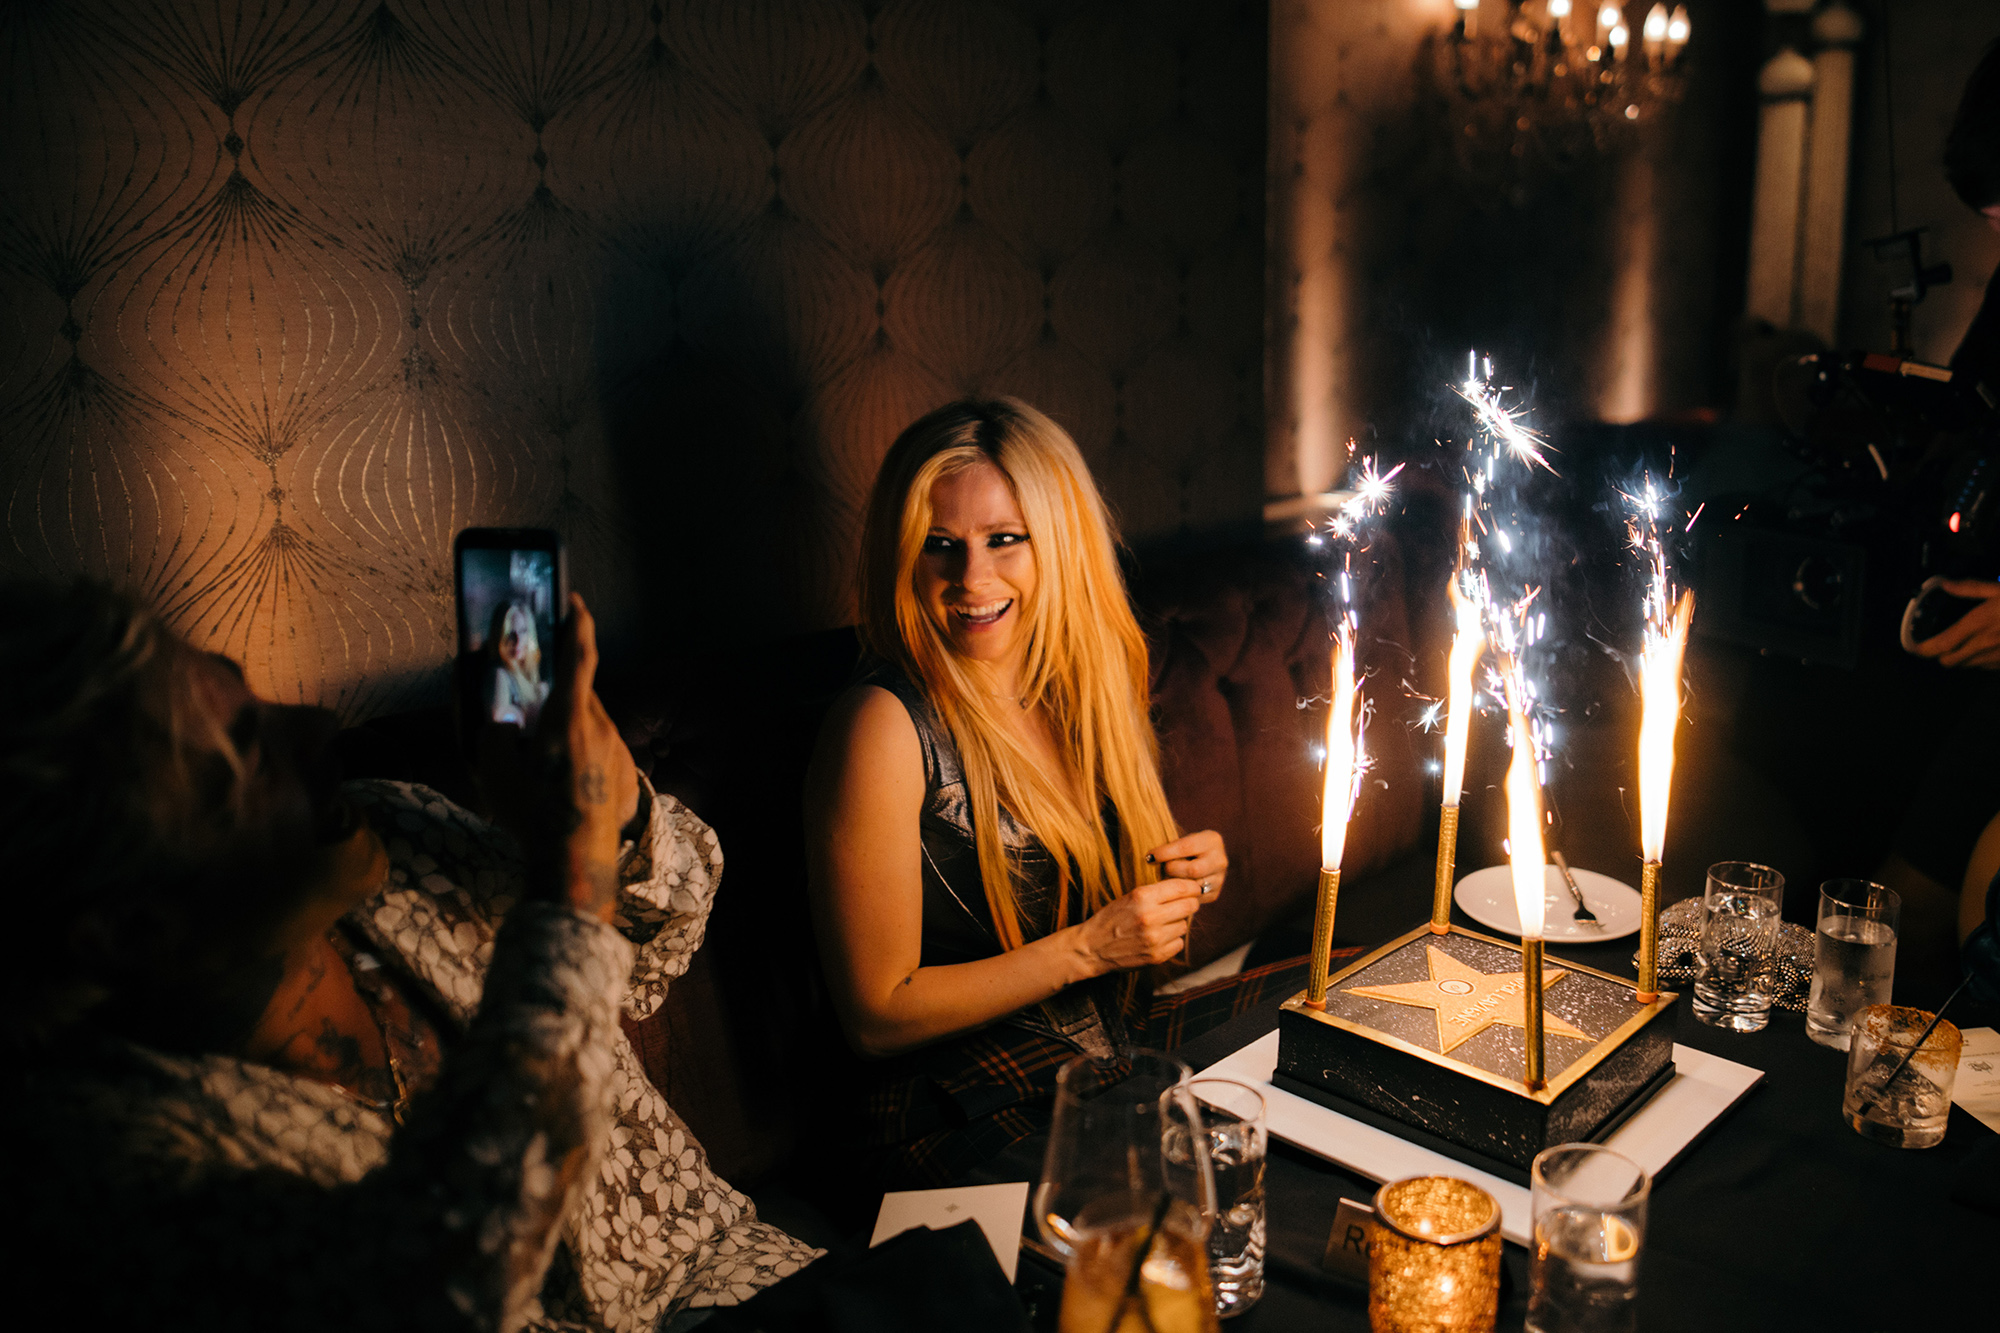 Avril Lavigne celebrates her star on the Hollywood Walk of Fame at Beauty & Essex LA